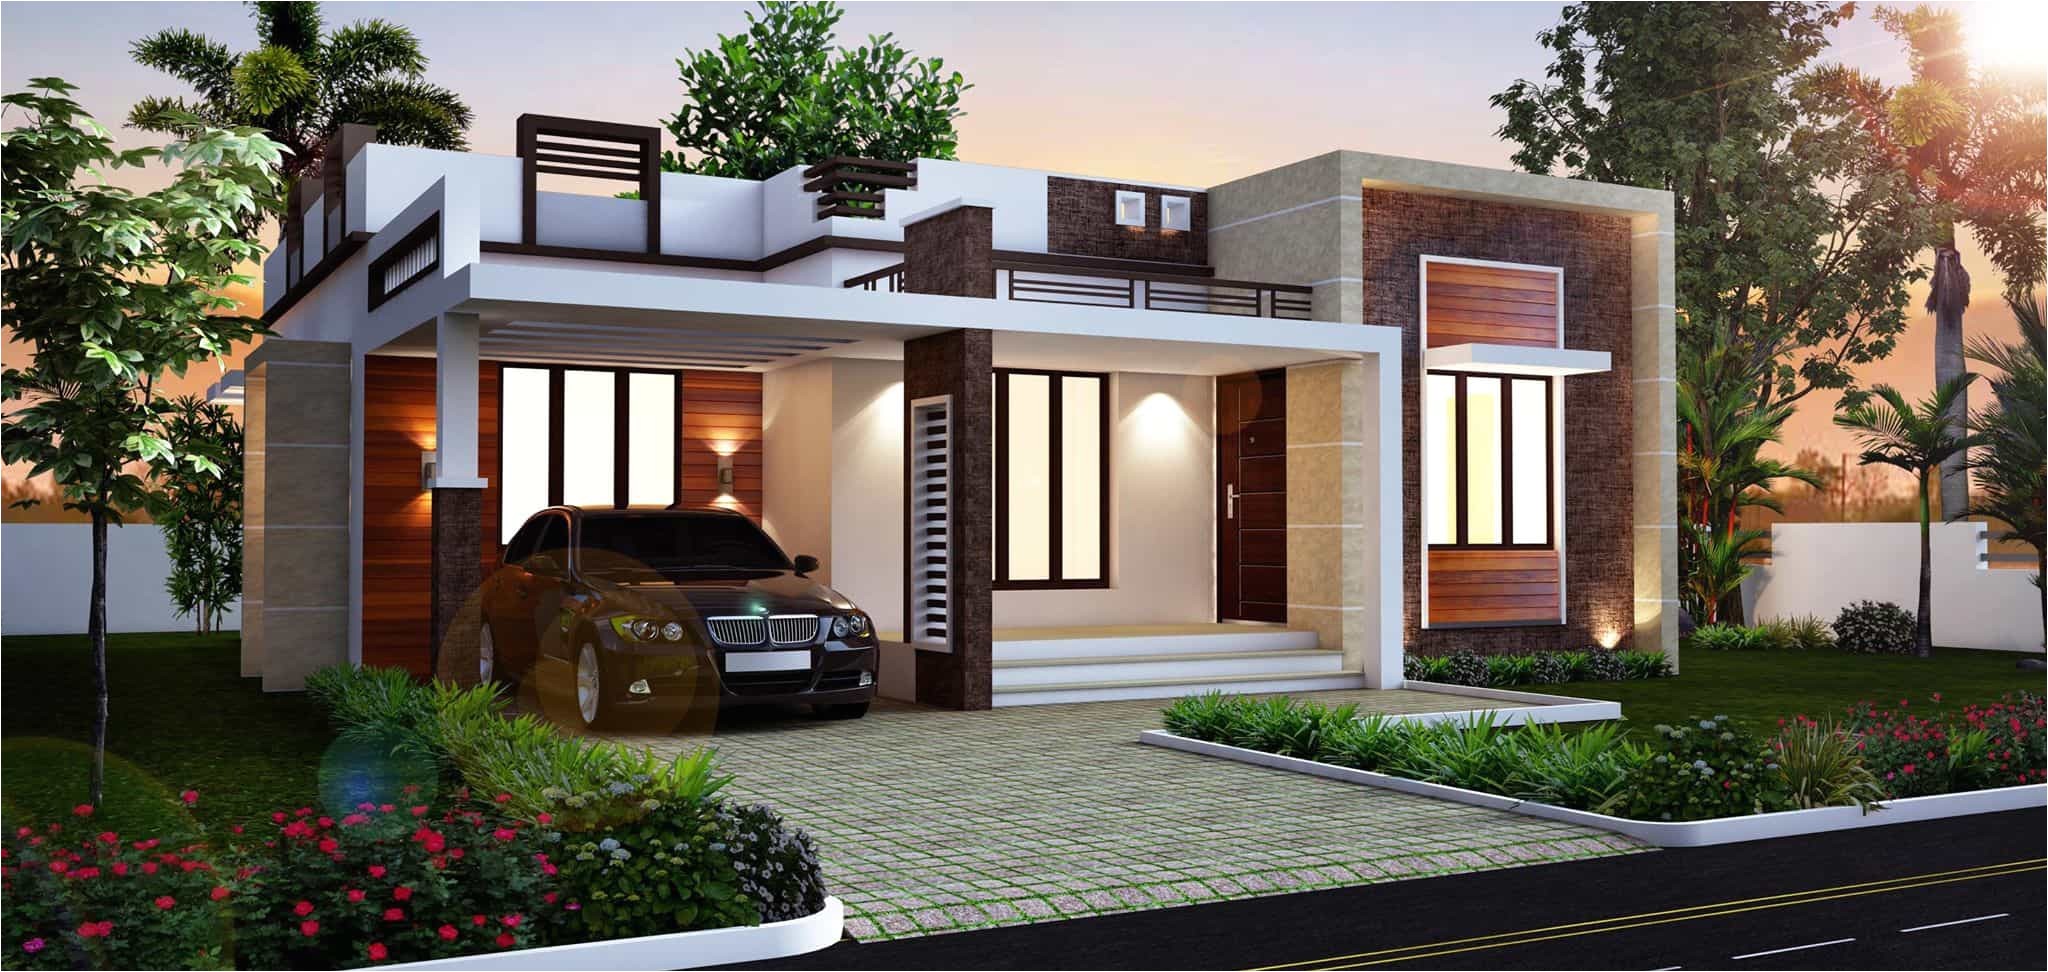 Small Homes Plans Kerala Home Design House Plans Indian Budget Models